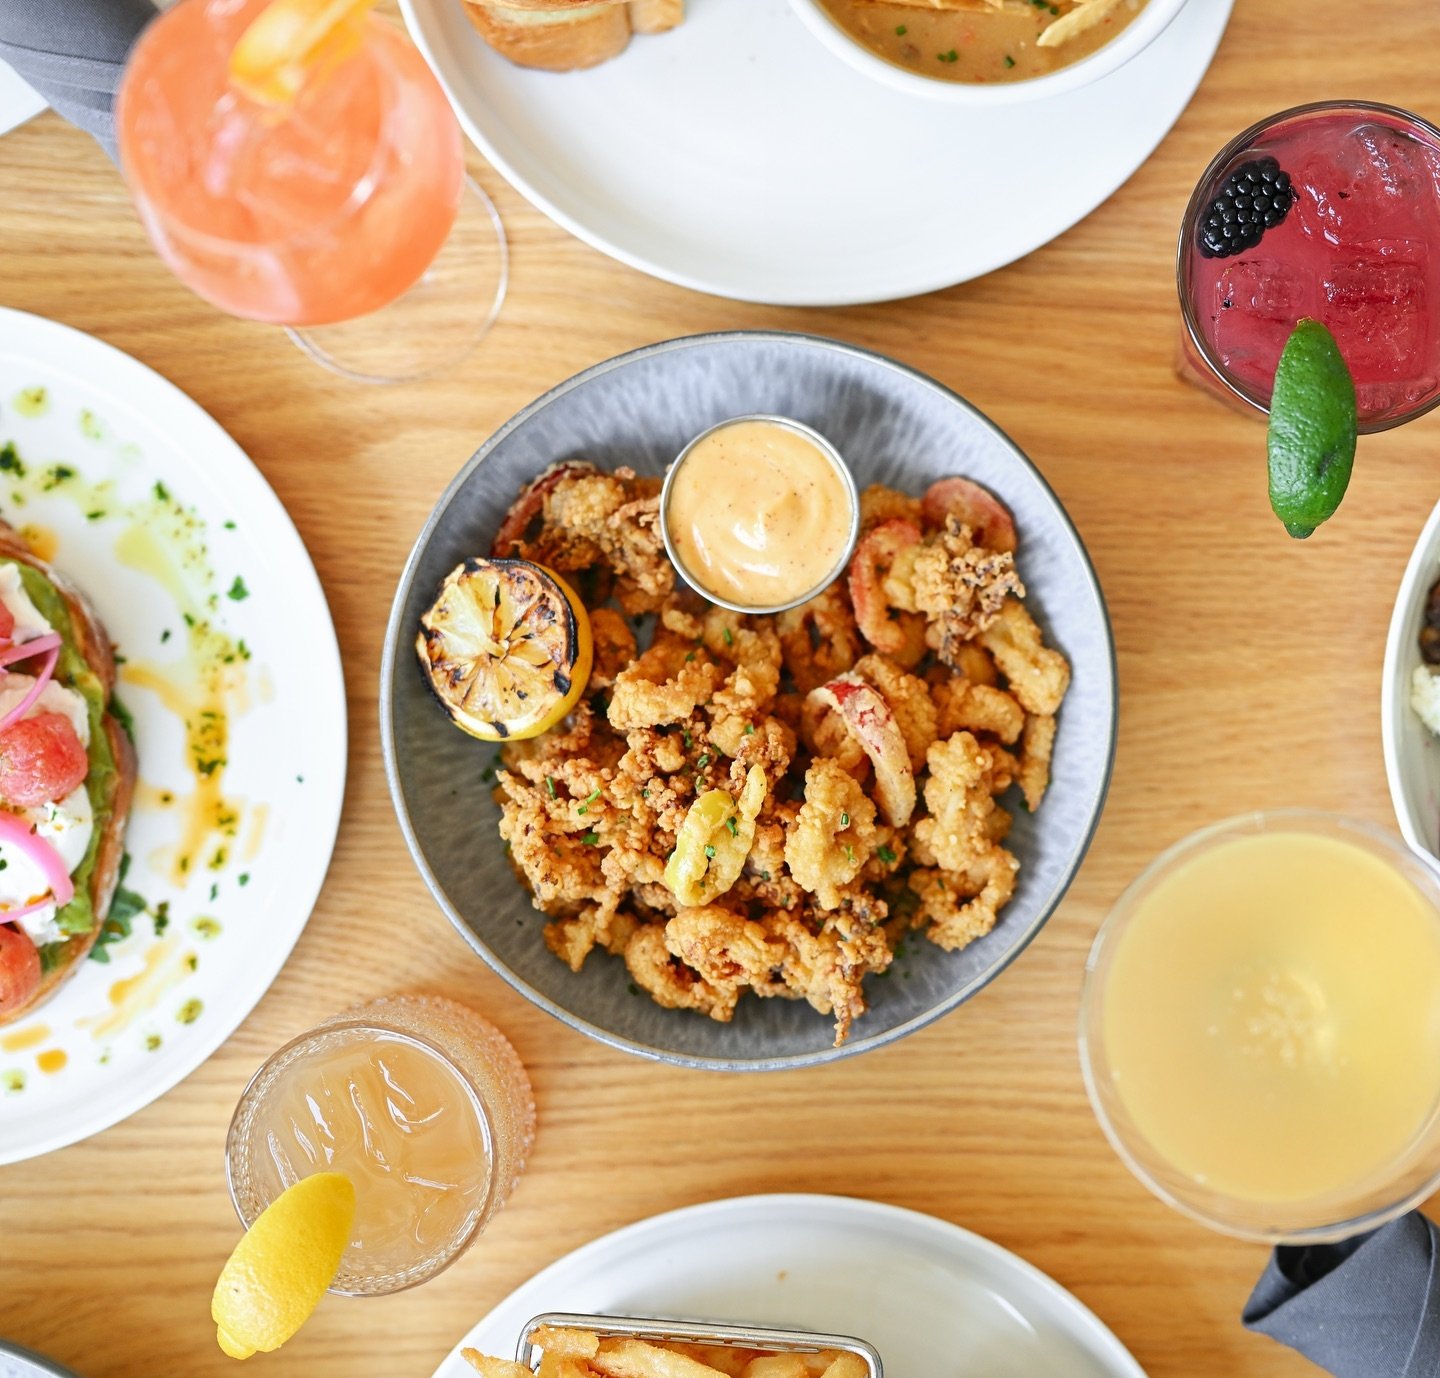 Join us for lunch this week!  We&rsquo;ve got a menu full of tasty, fresh dishes - what&rsquo;s your pick?

⭐ Crispy Calamari with hot cherry peppers, chili aioli, fresh lemon, cilantro

⭐ Avocado Toast featuring burrata, blistered heirloom tomatoes,